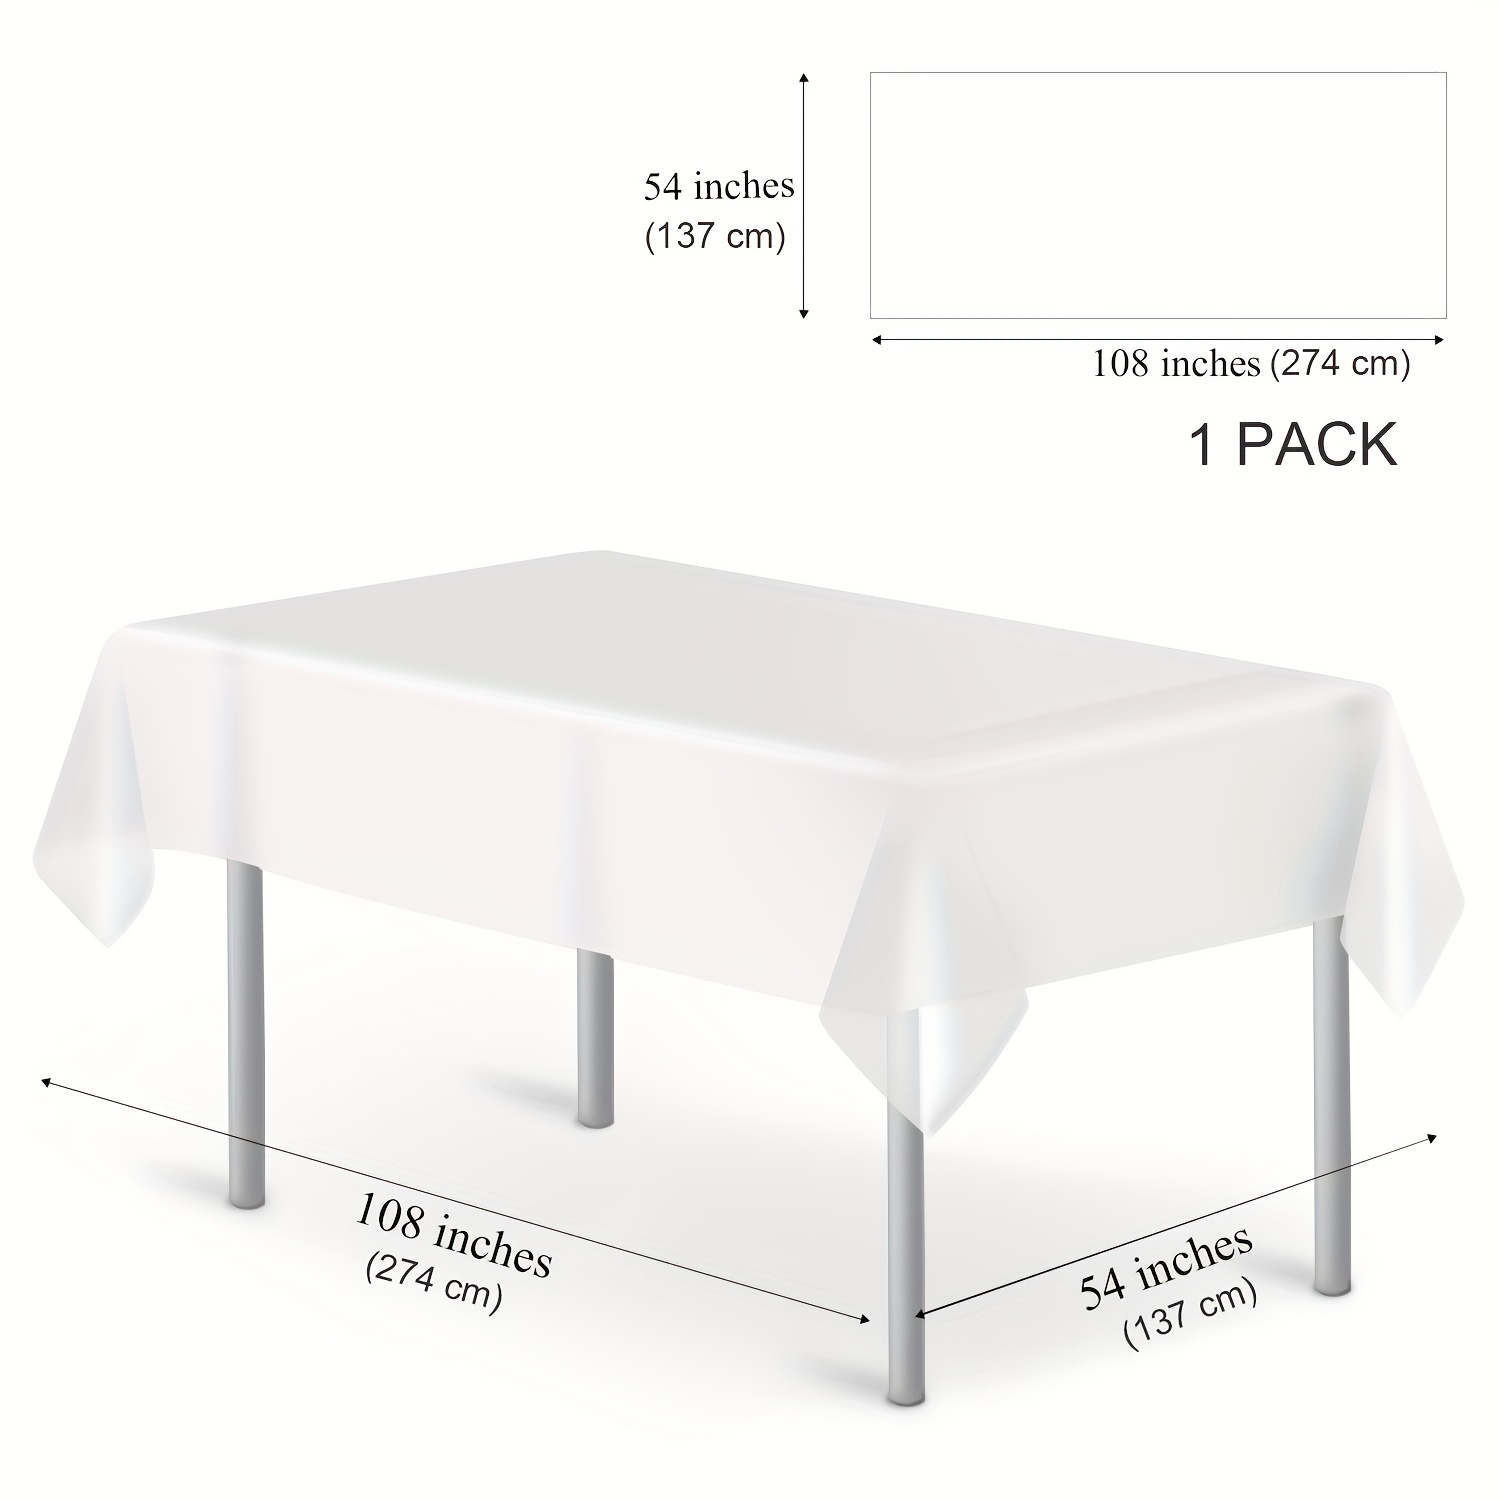 Craft And Party, 54X 100 Ft. Plastic Table Cover Roll for Party